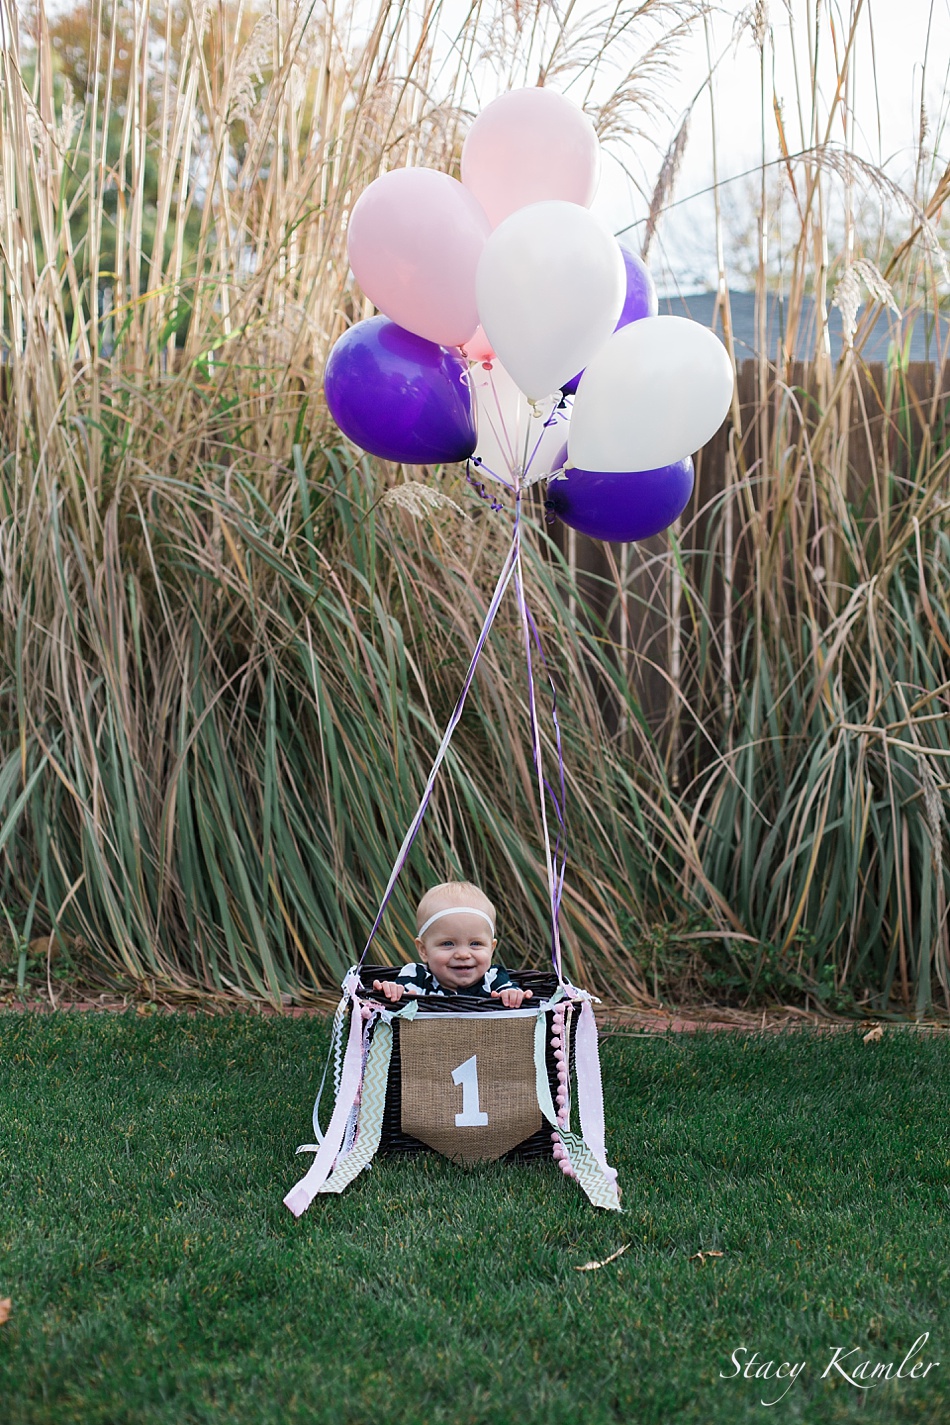 One year old with Purple Balloons